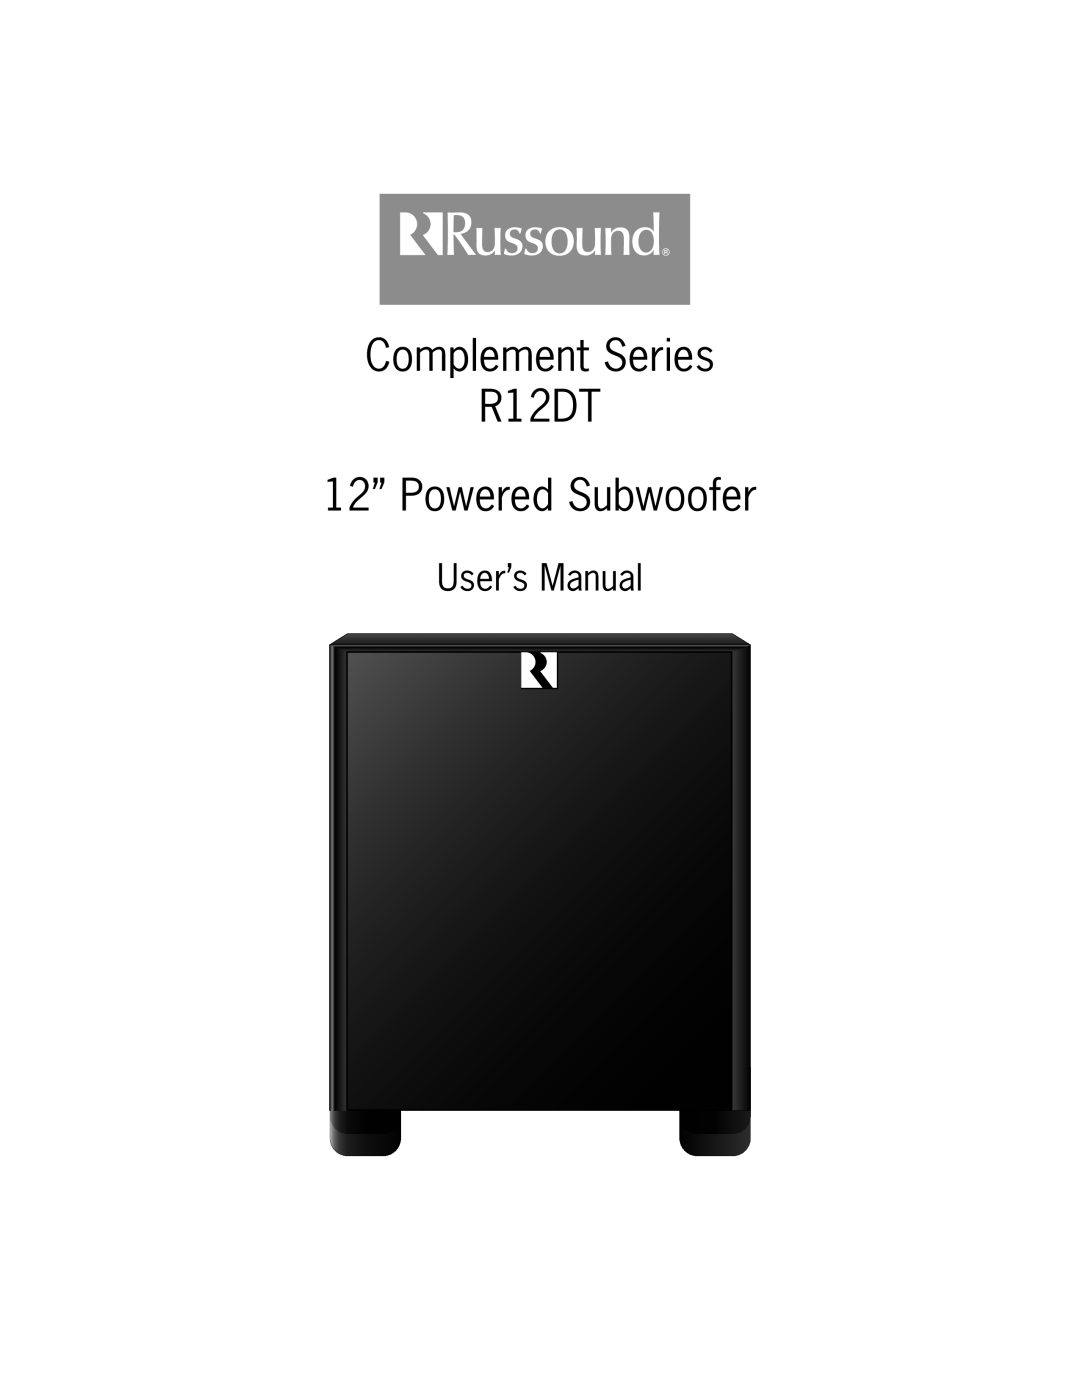 Russound user manual Complement Series R12DT 12” Powered Subwoofer 